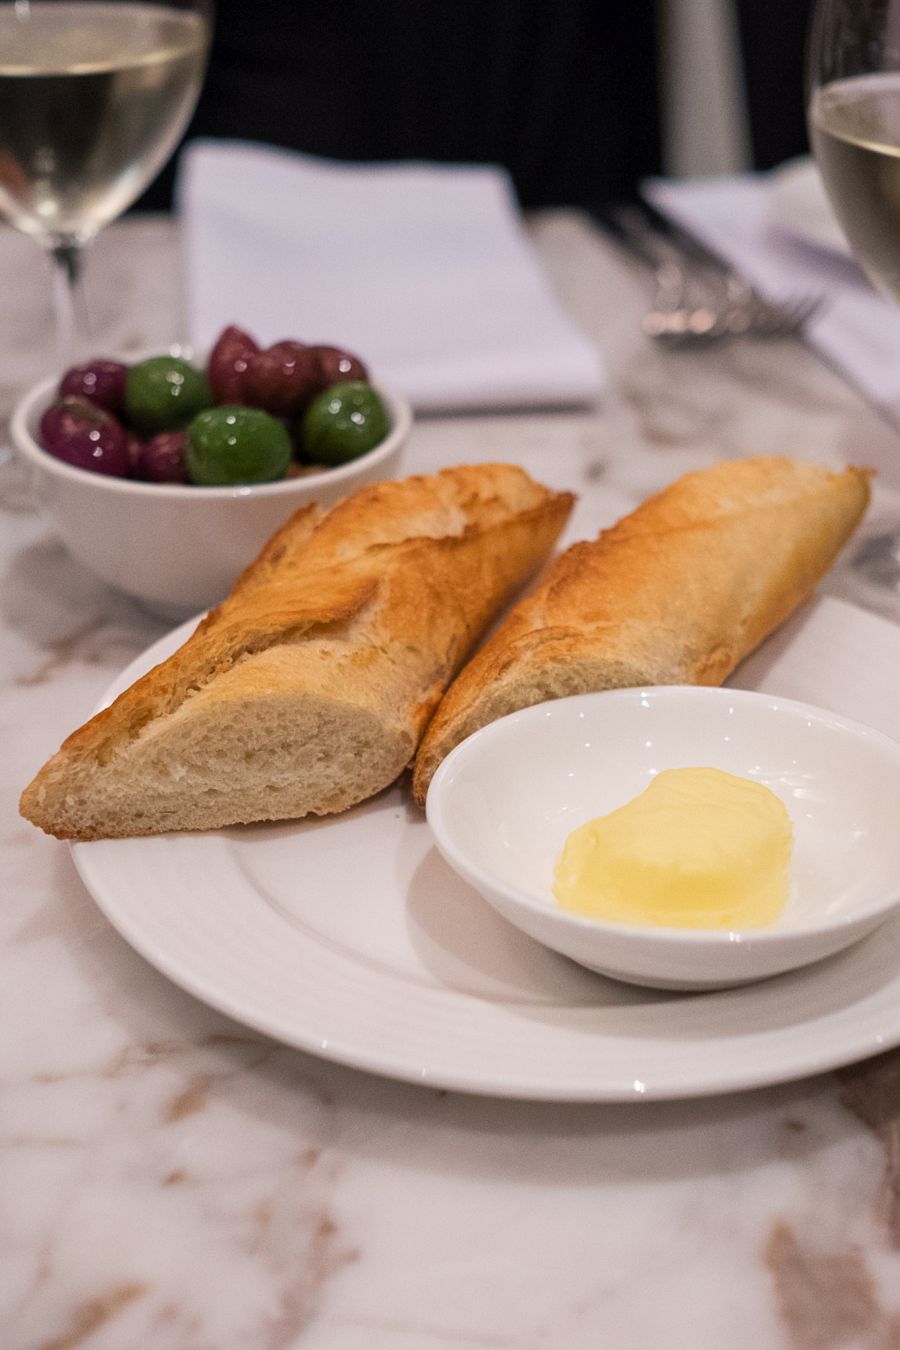 Baguette with French butter (AU$3.00 per person)